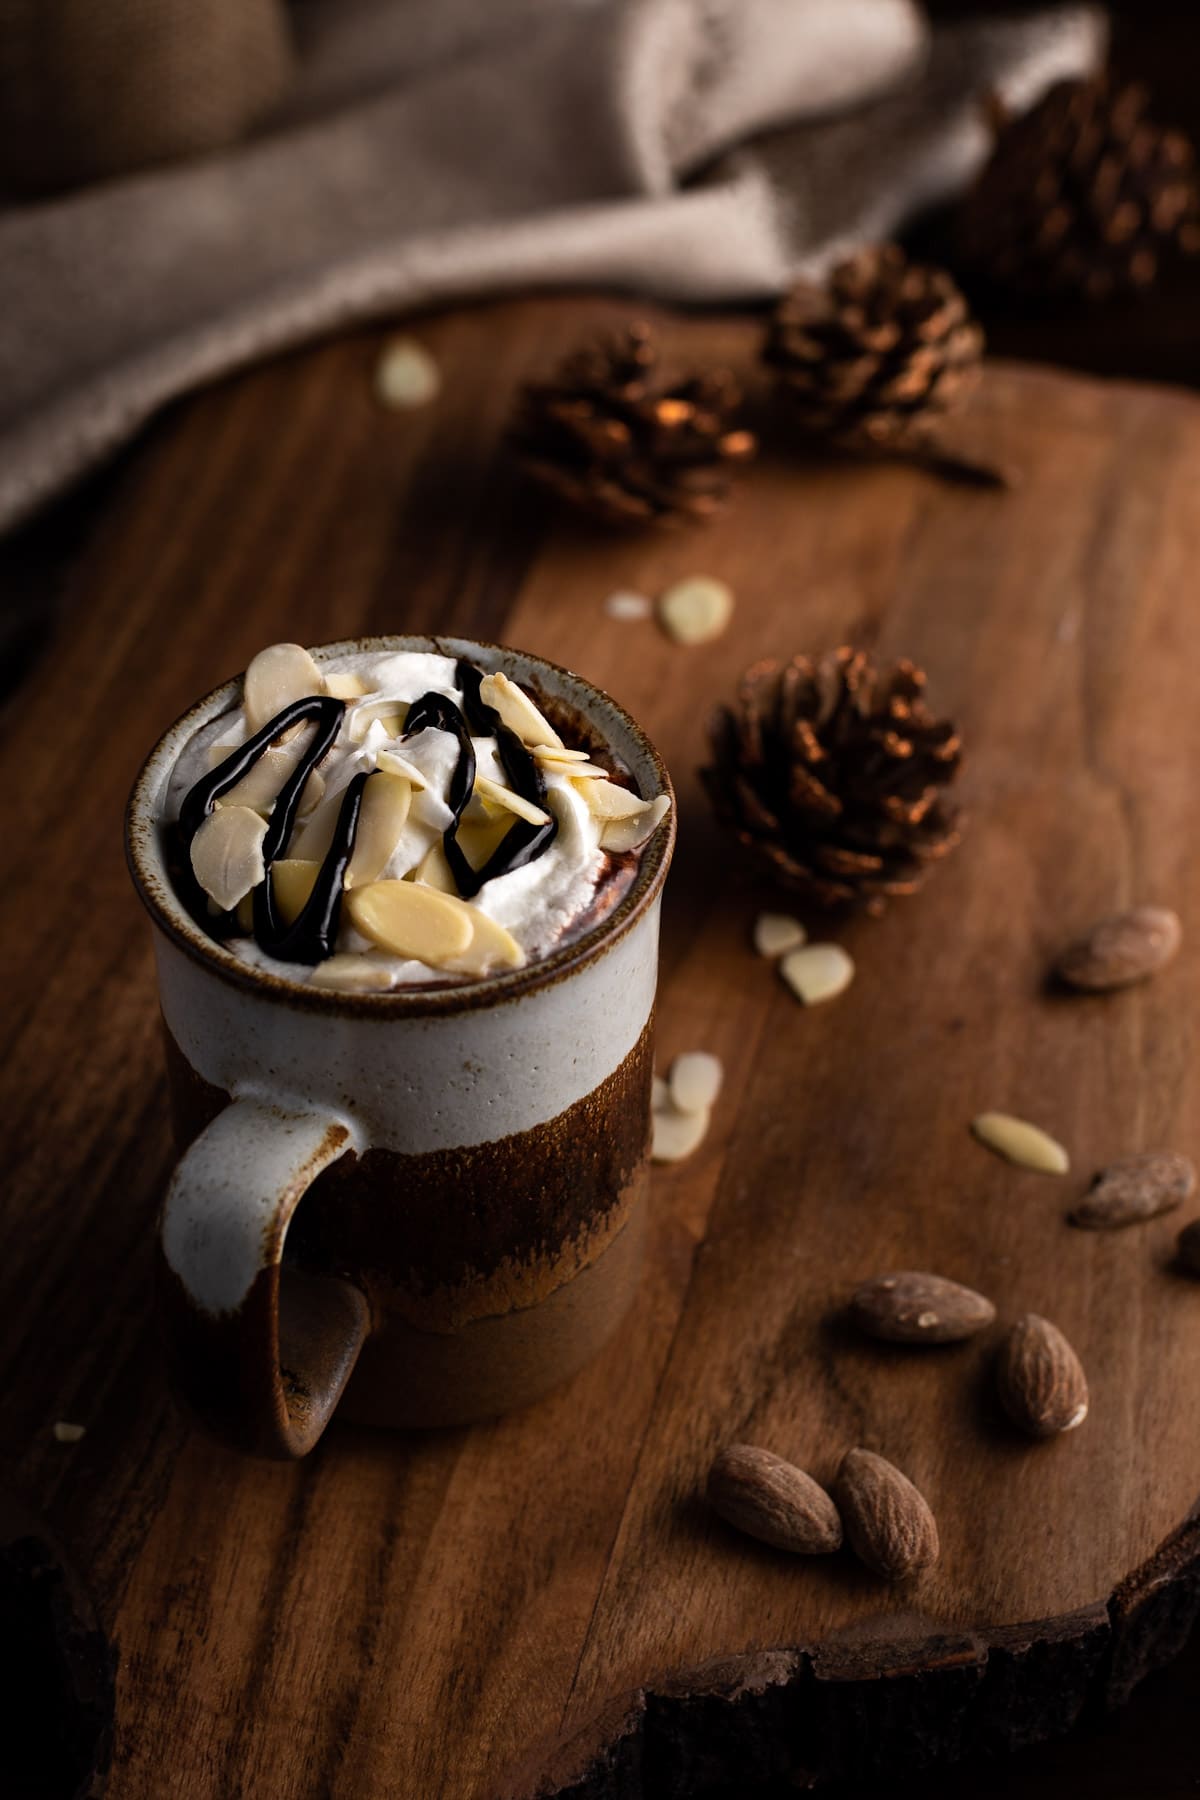 A brown mug of hot chocolate topped with whipped cream and almonds, next to scattered almonds.